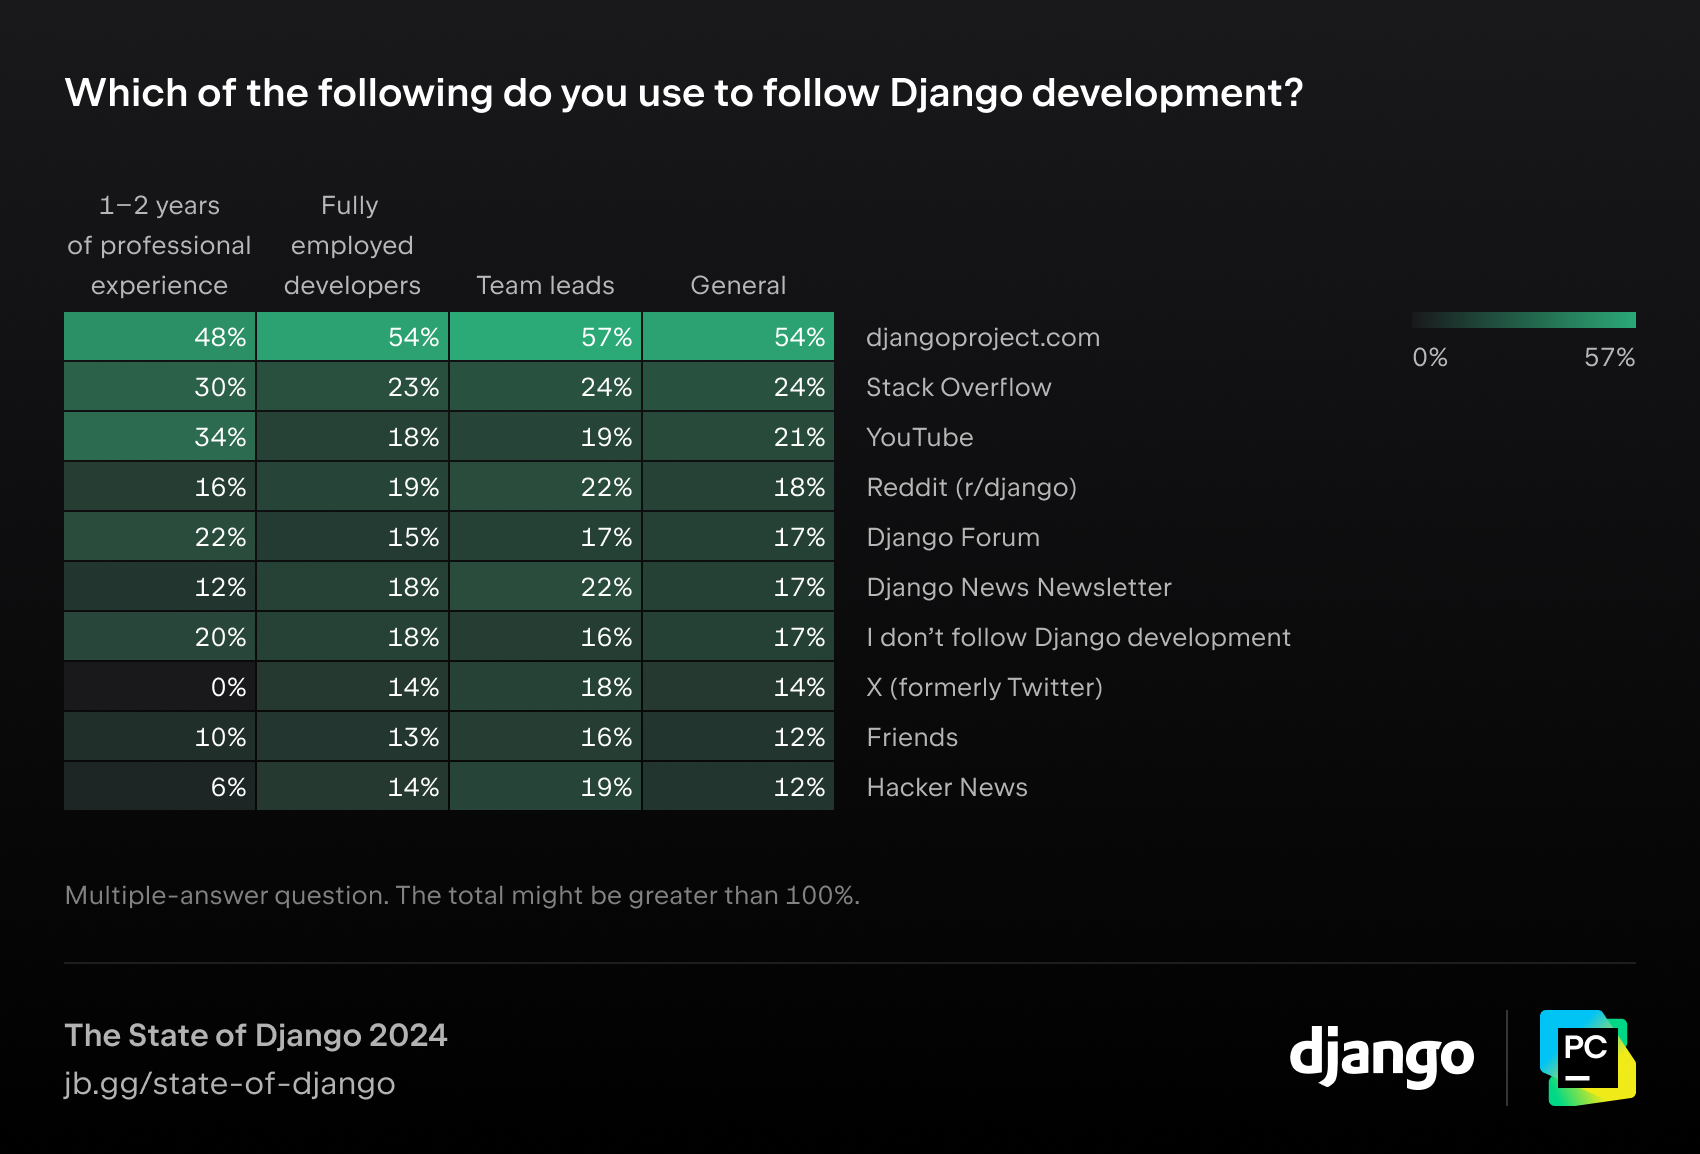 Which of the following do you use to follow Django development?